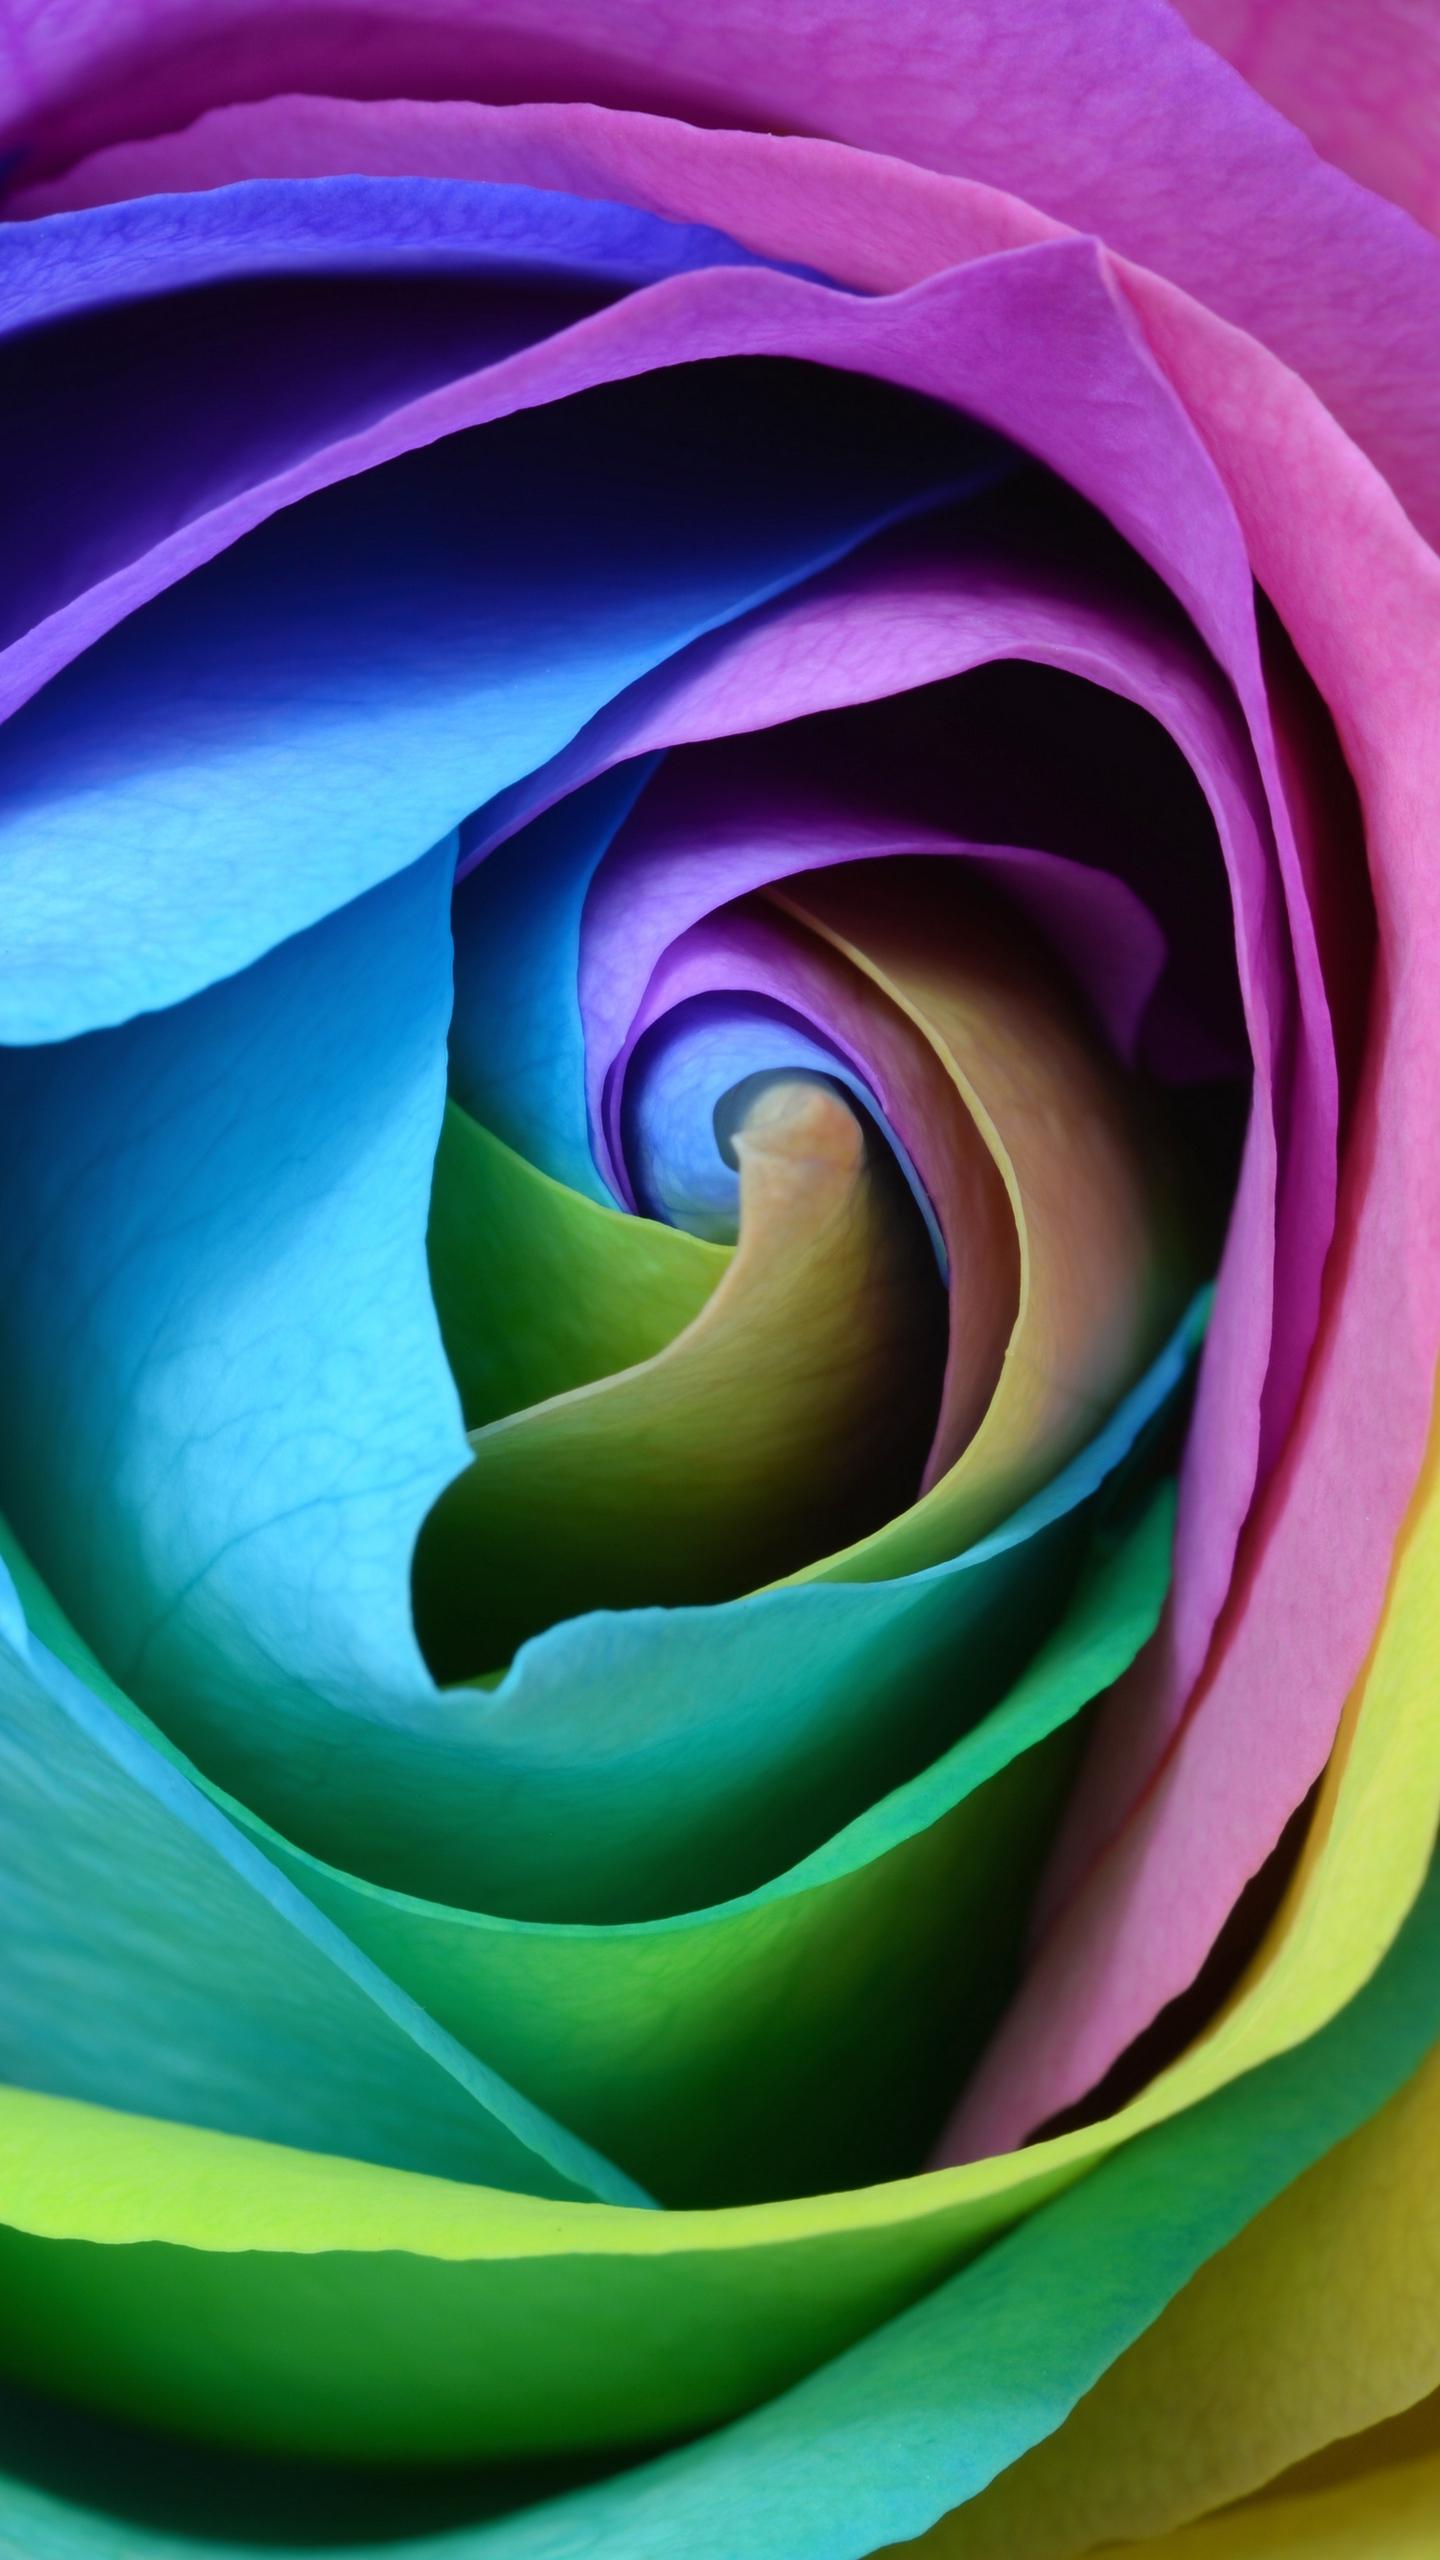 Download Wallpaper 1440x2560 Rose, Colorful, Bud, Close Up Qhd